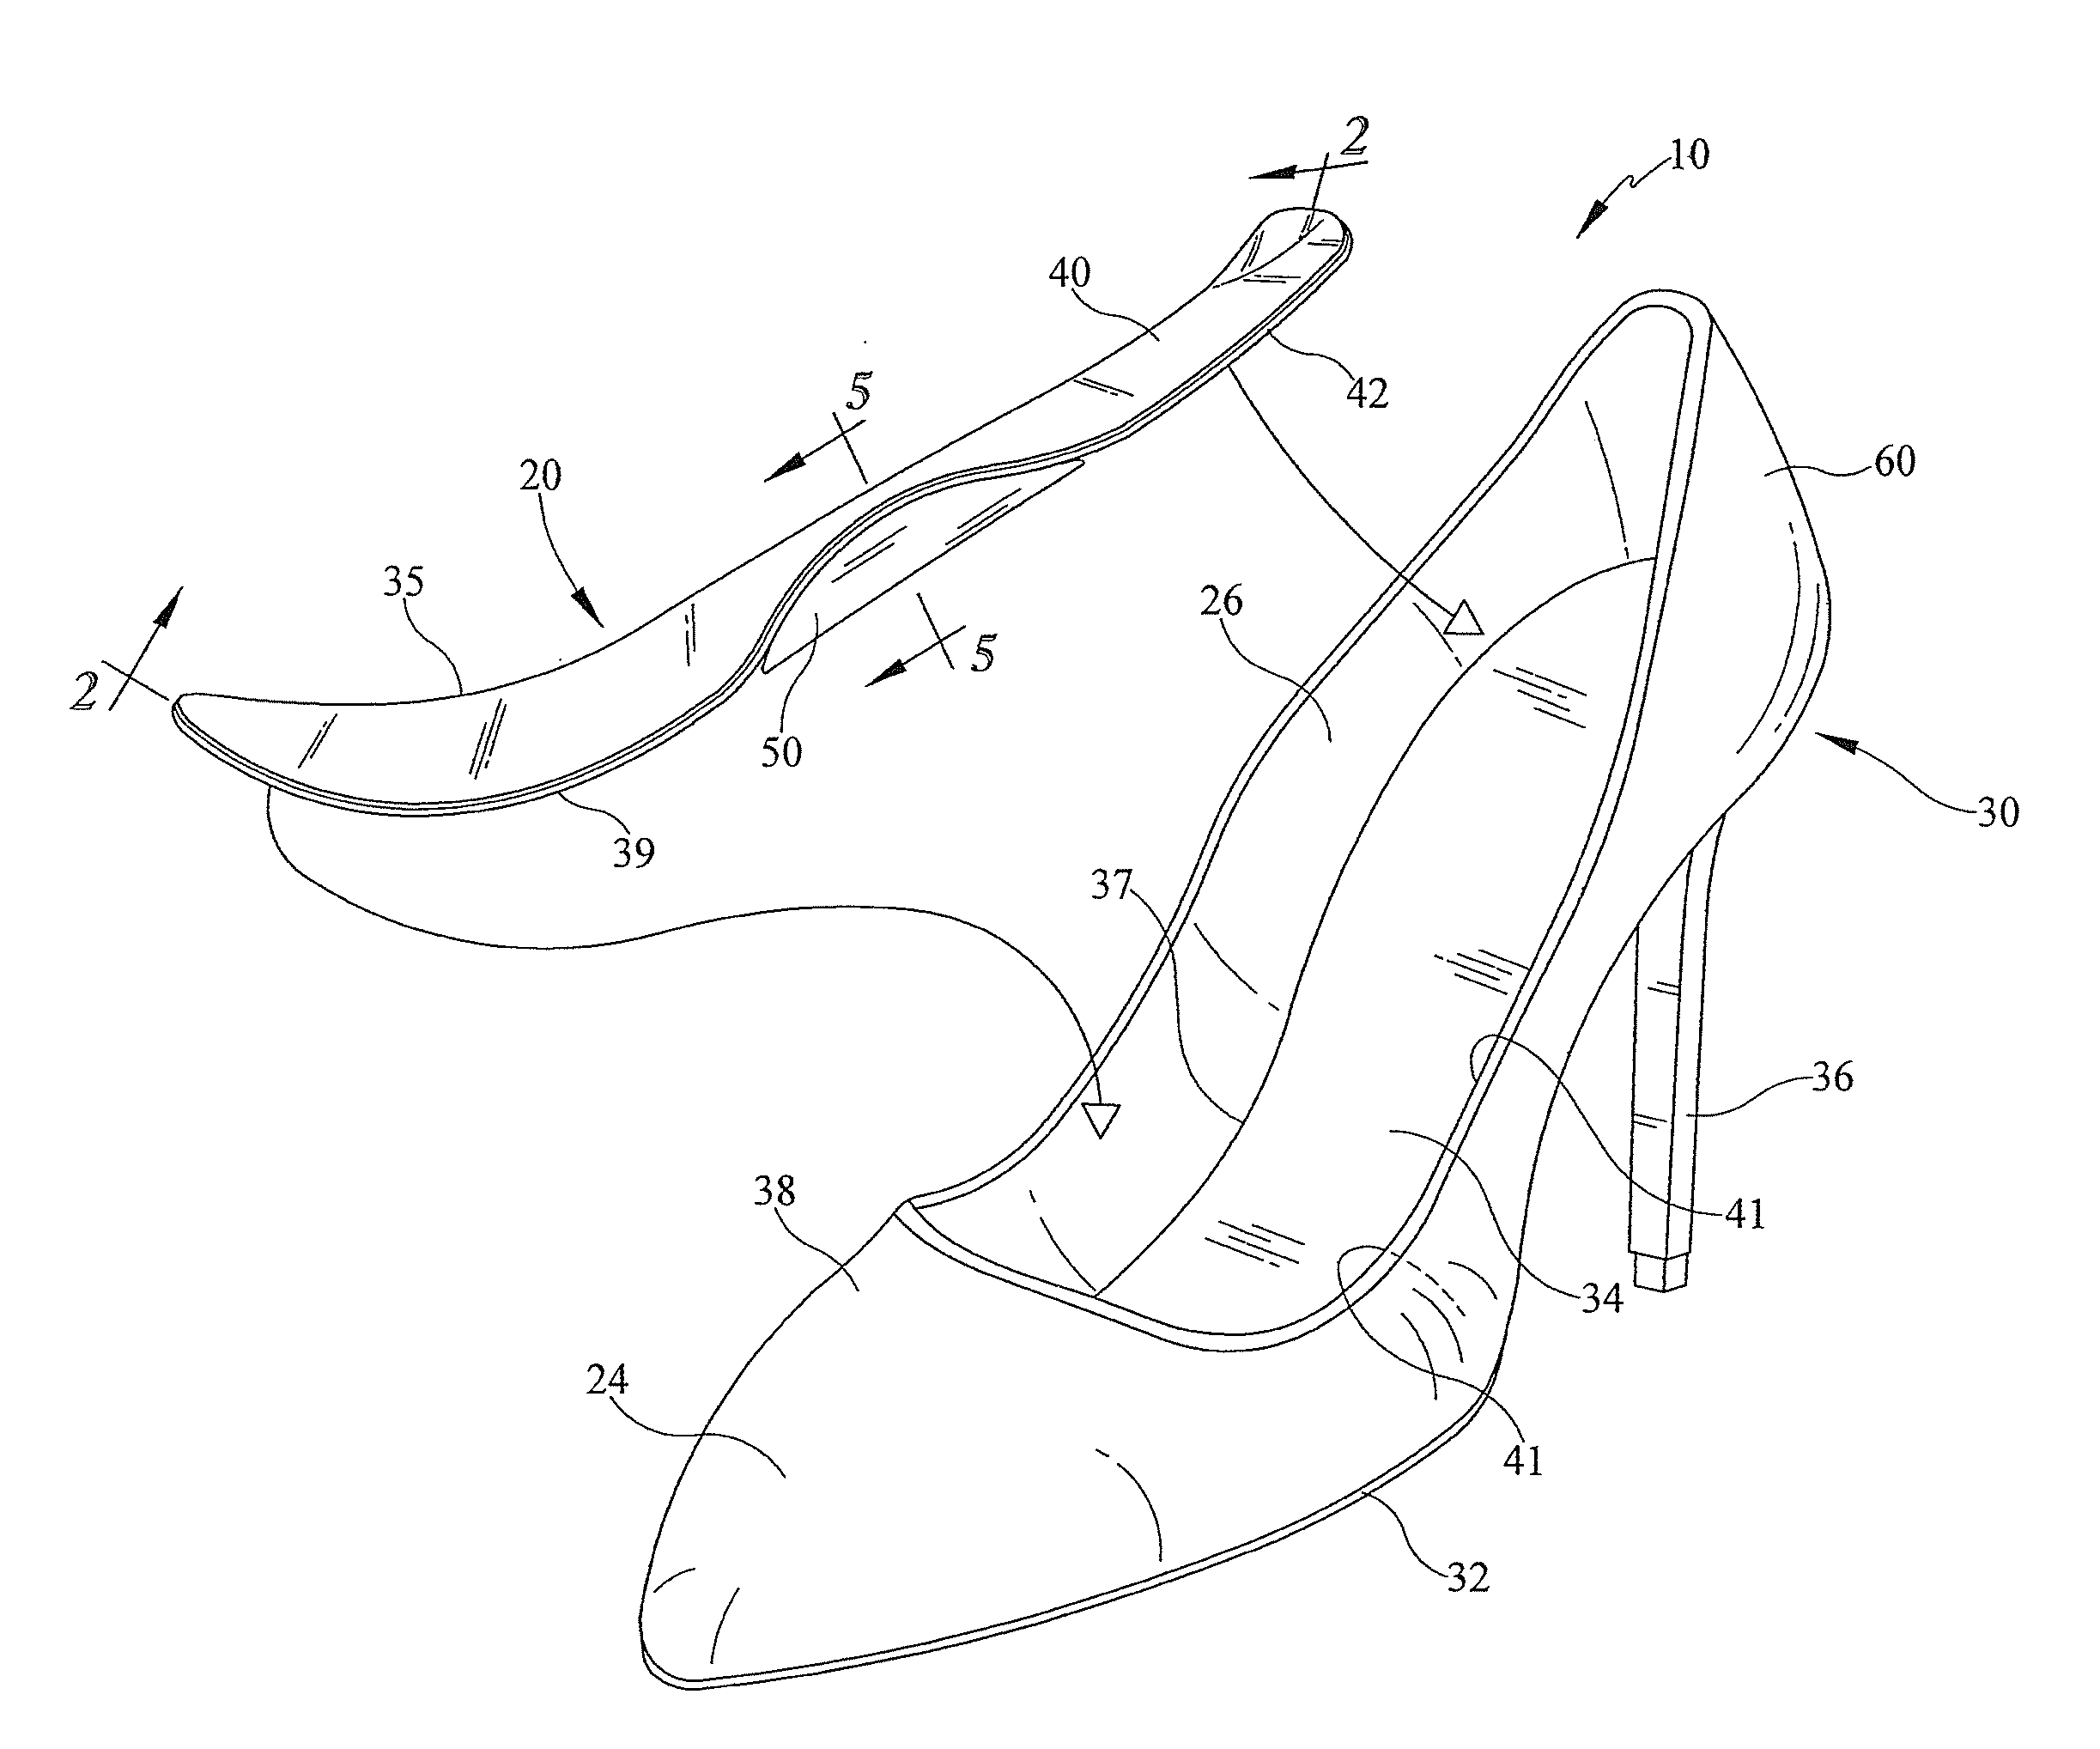 Orthotic insole for a woman's shoe